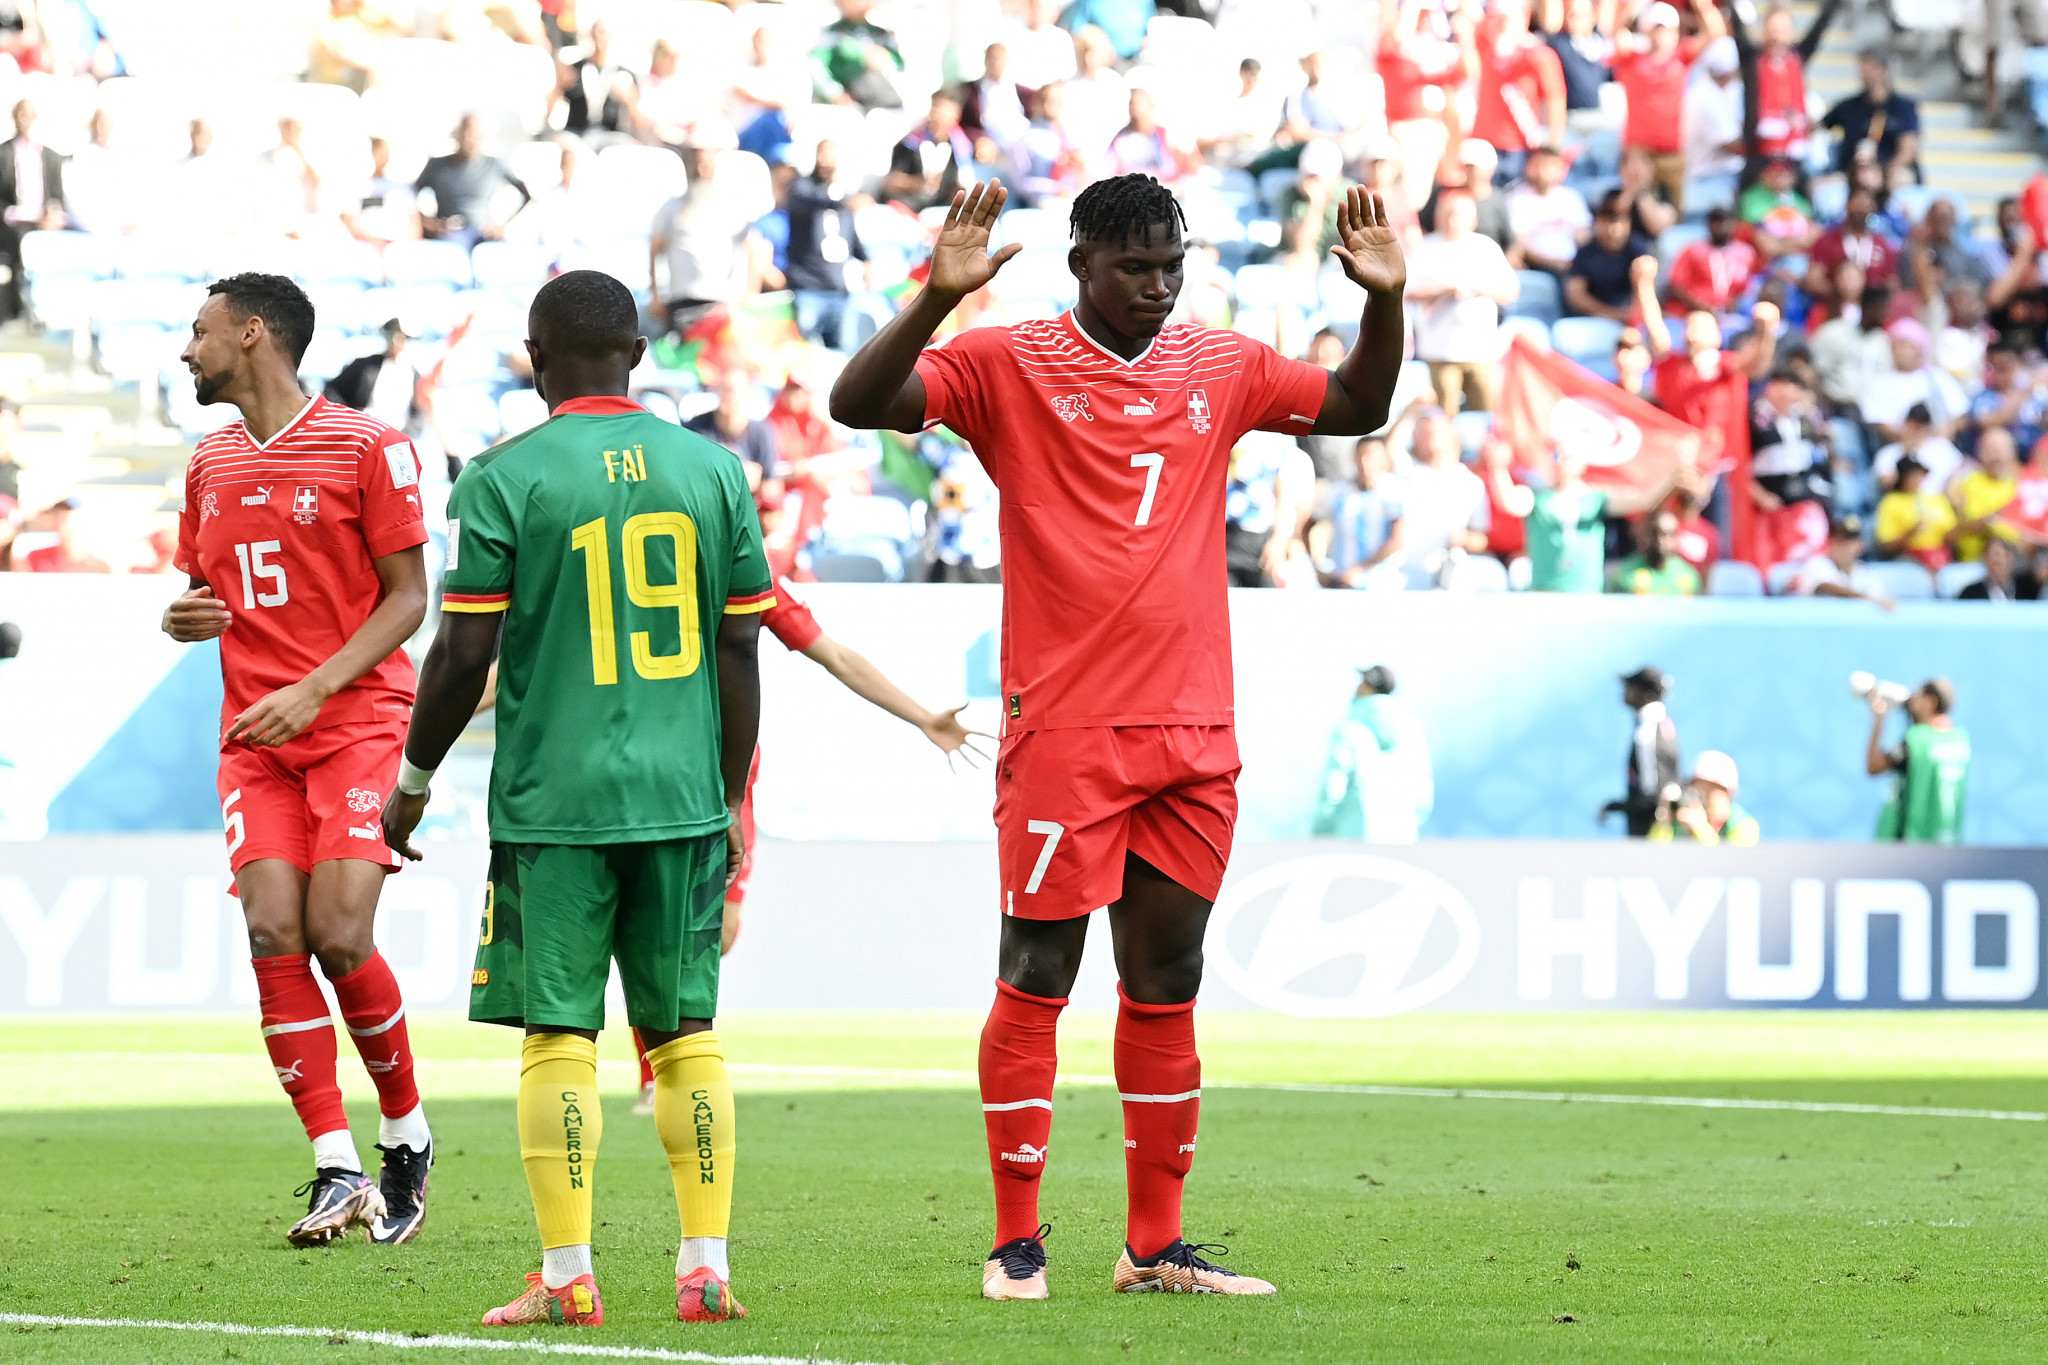 Cameroon-born Breel Embolo did not celebrate after scoring the winner for Switzerland ©Getty Images